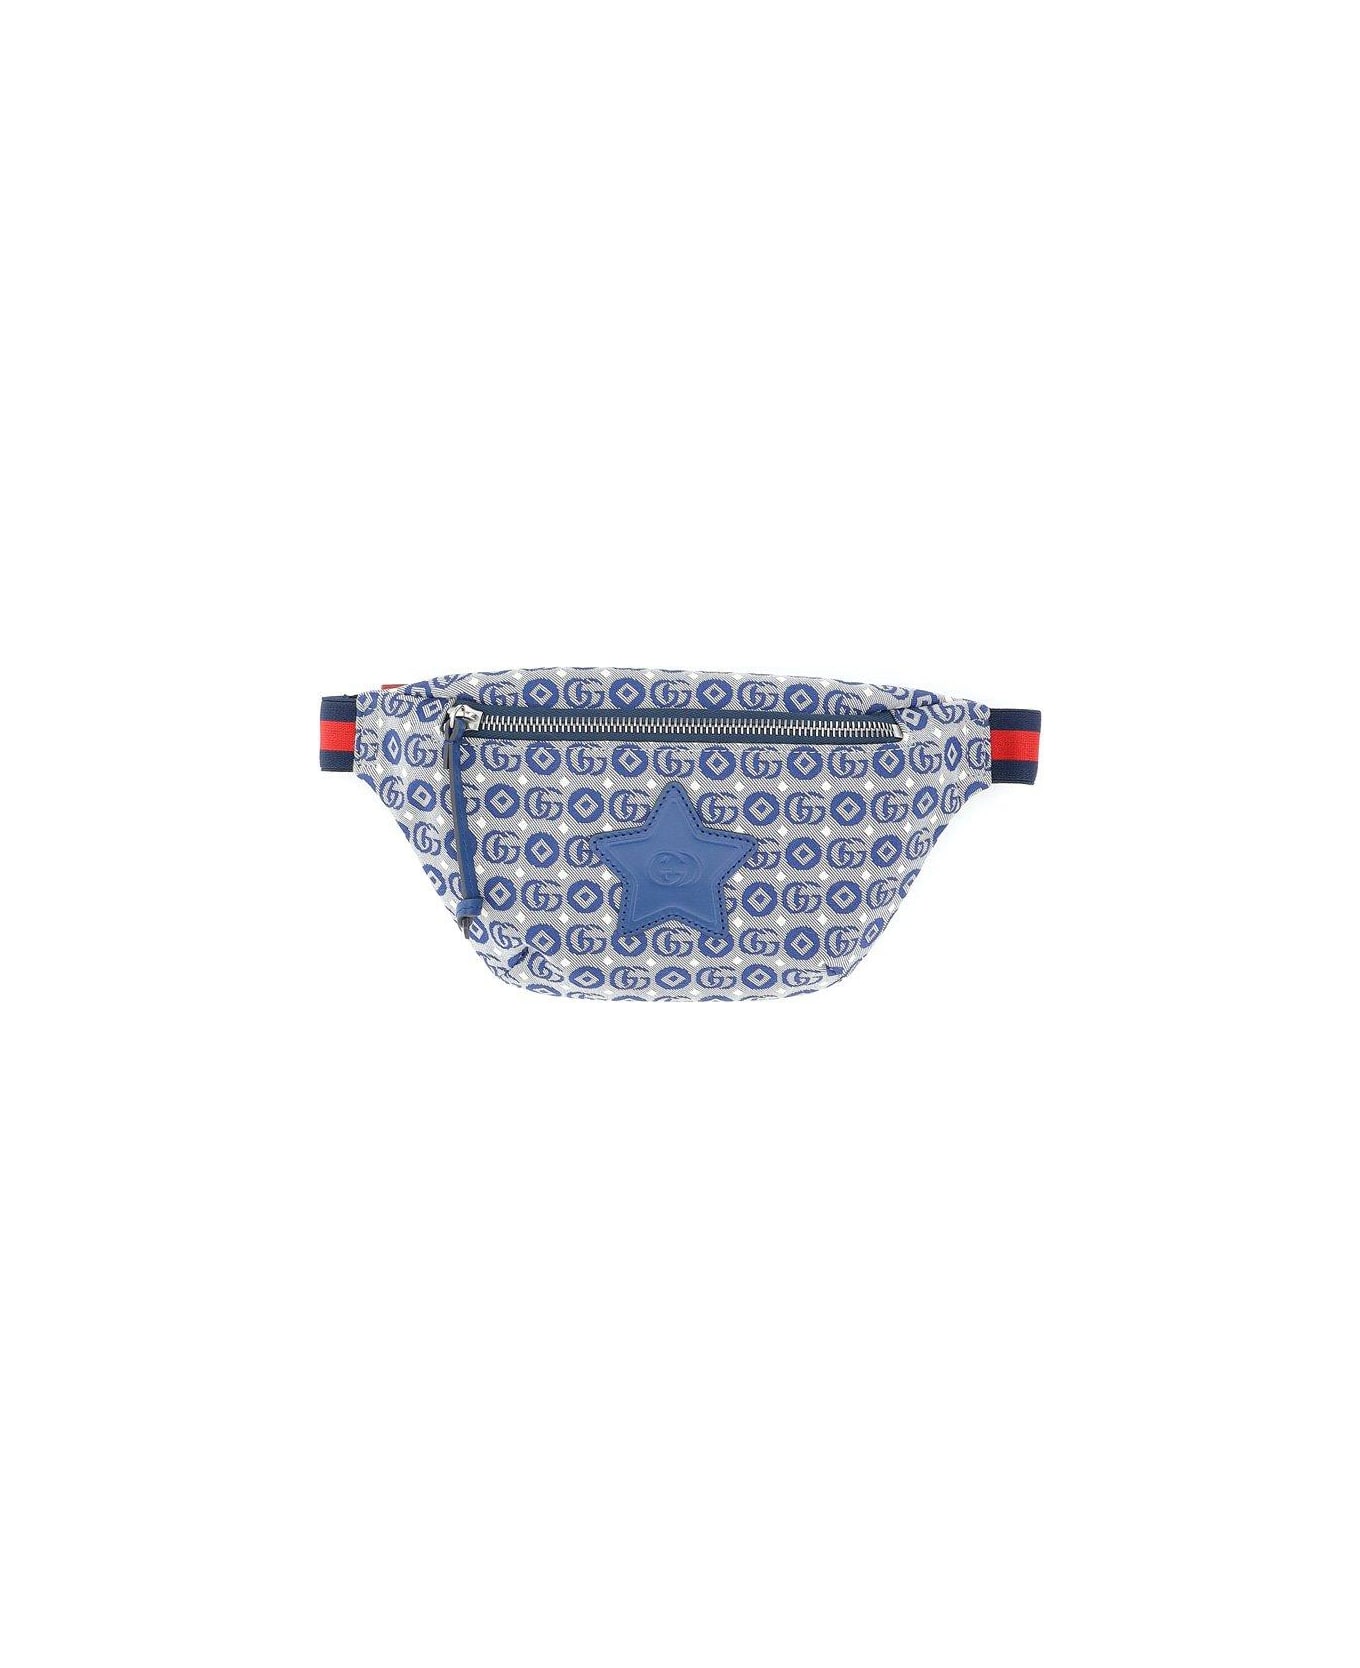 Gucci All-over Patterned Zipped Belt Bag - Bluette Roy